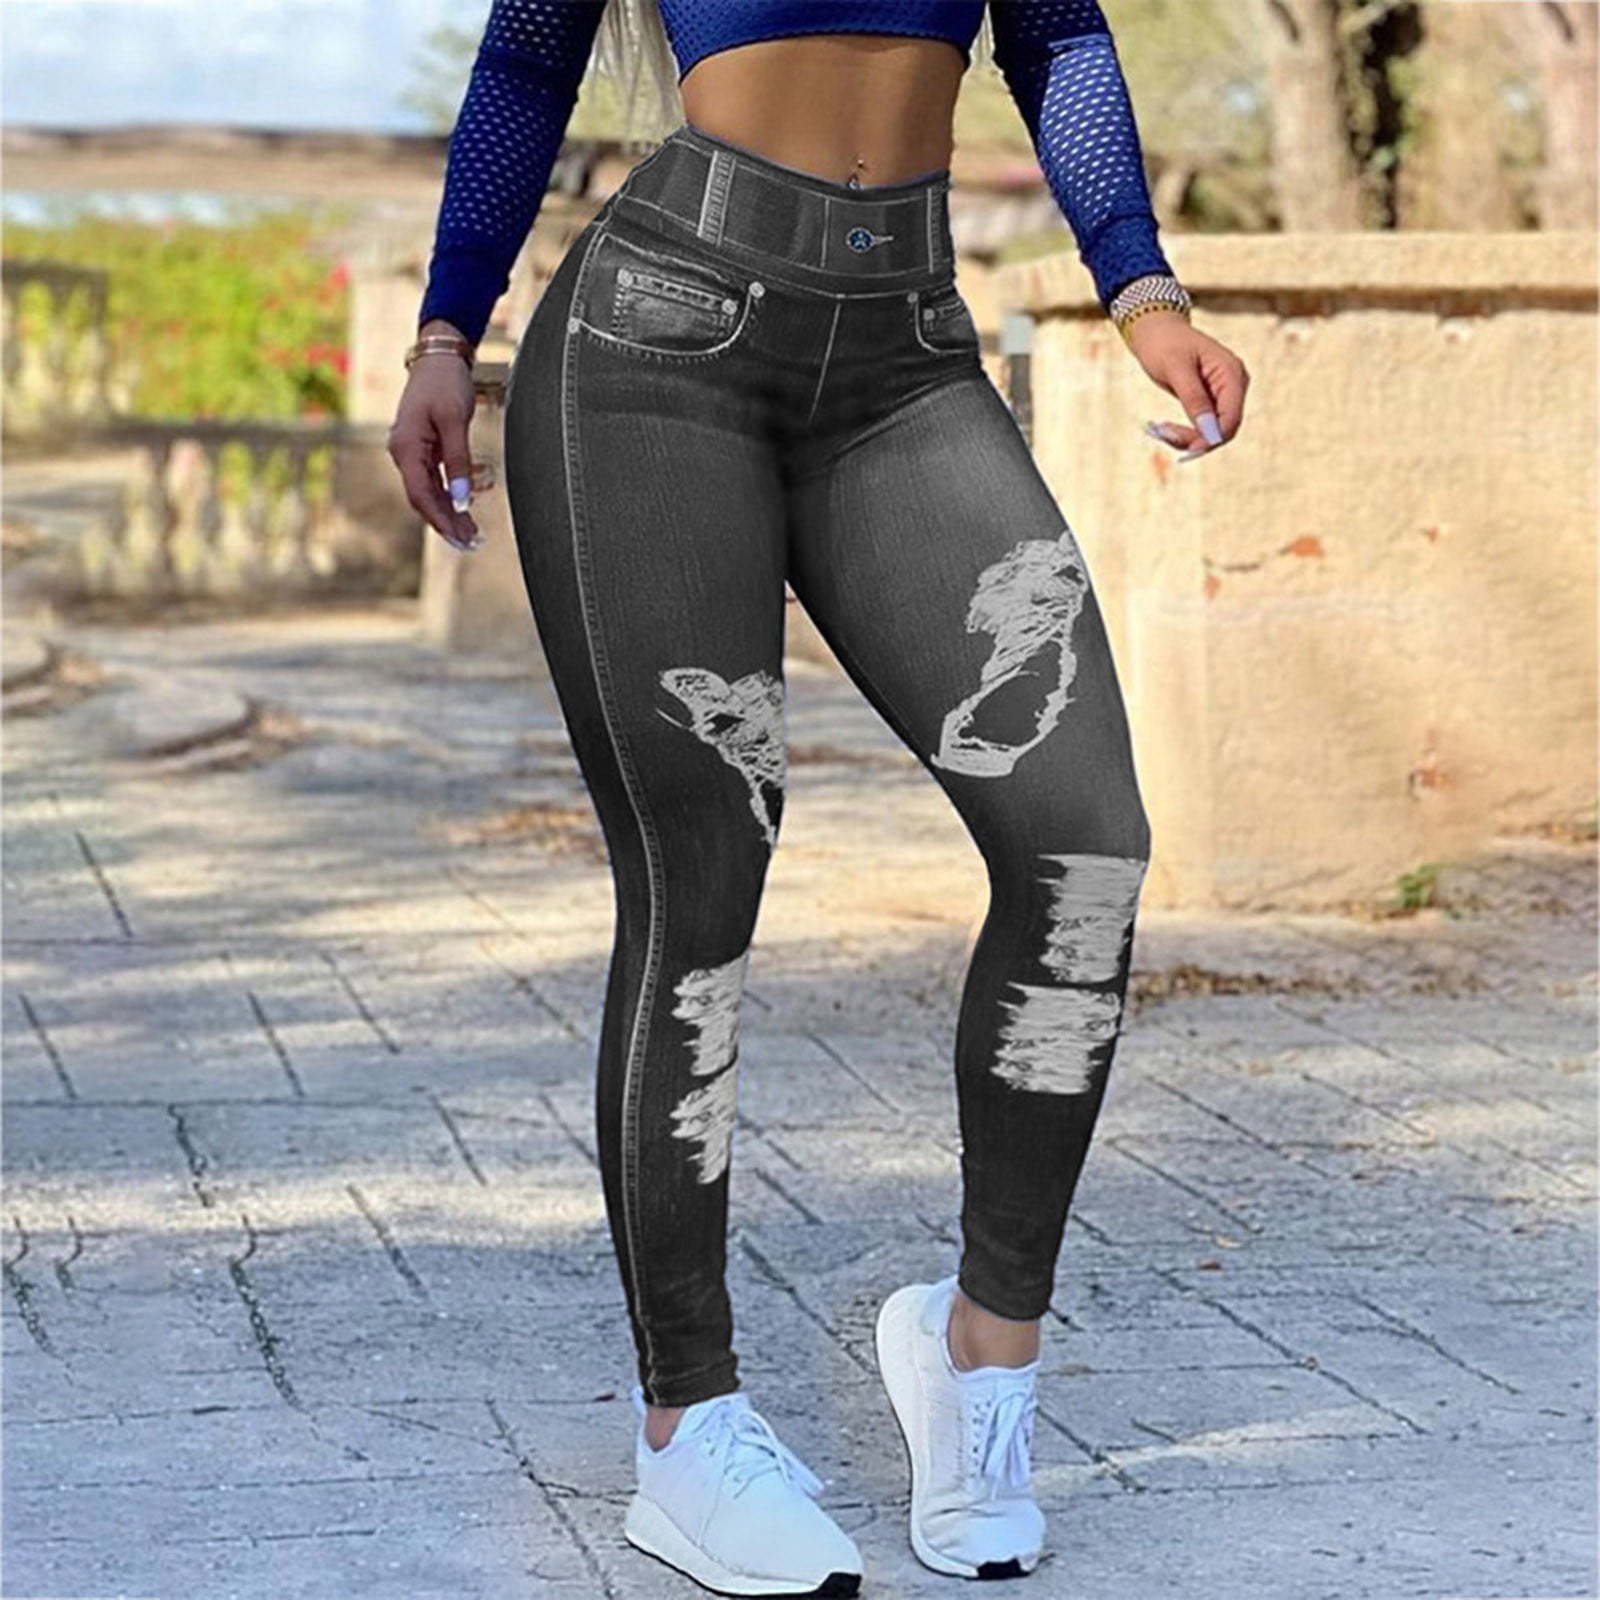 Olyvenn Women's Oversized Sexy Temperament Printed Sports Active Leggings  With Hip Lifting Yoga Pants Trendy Comfy Loose Fit Casual Pants Gray 8 